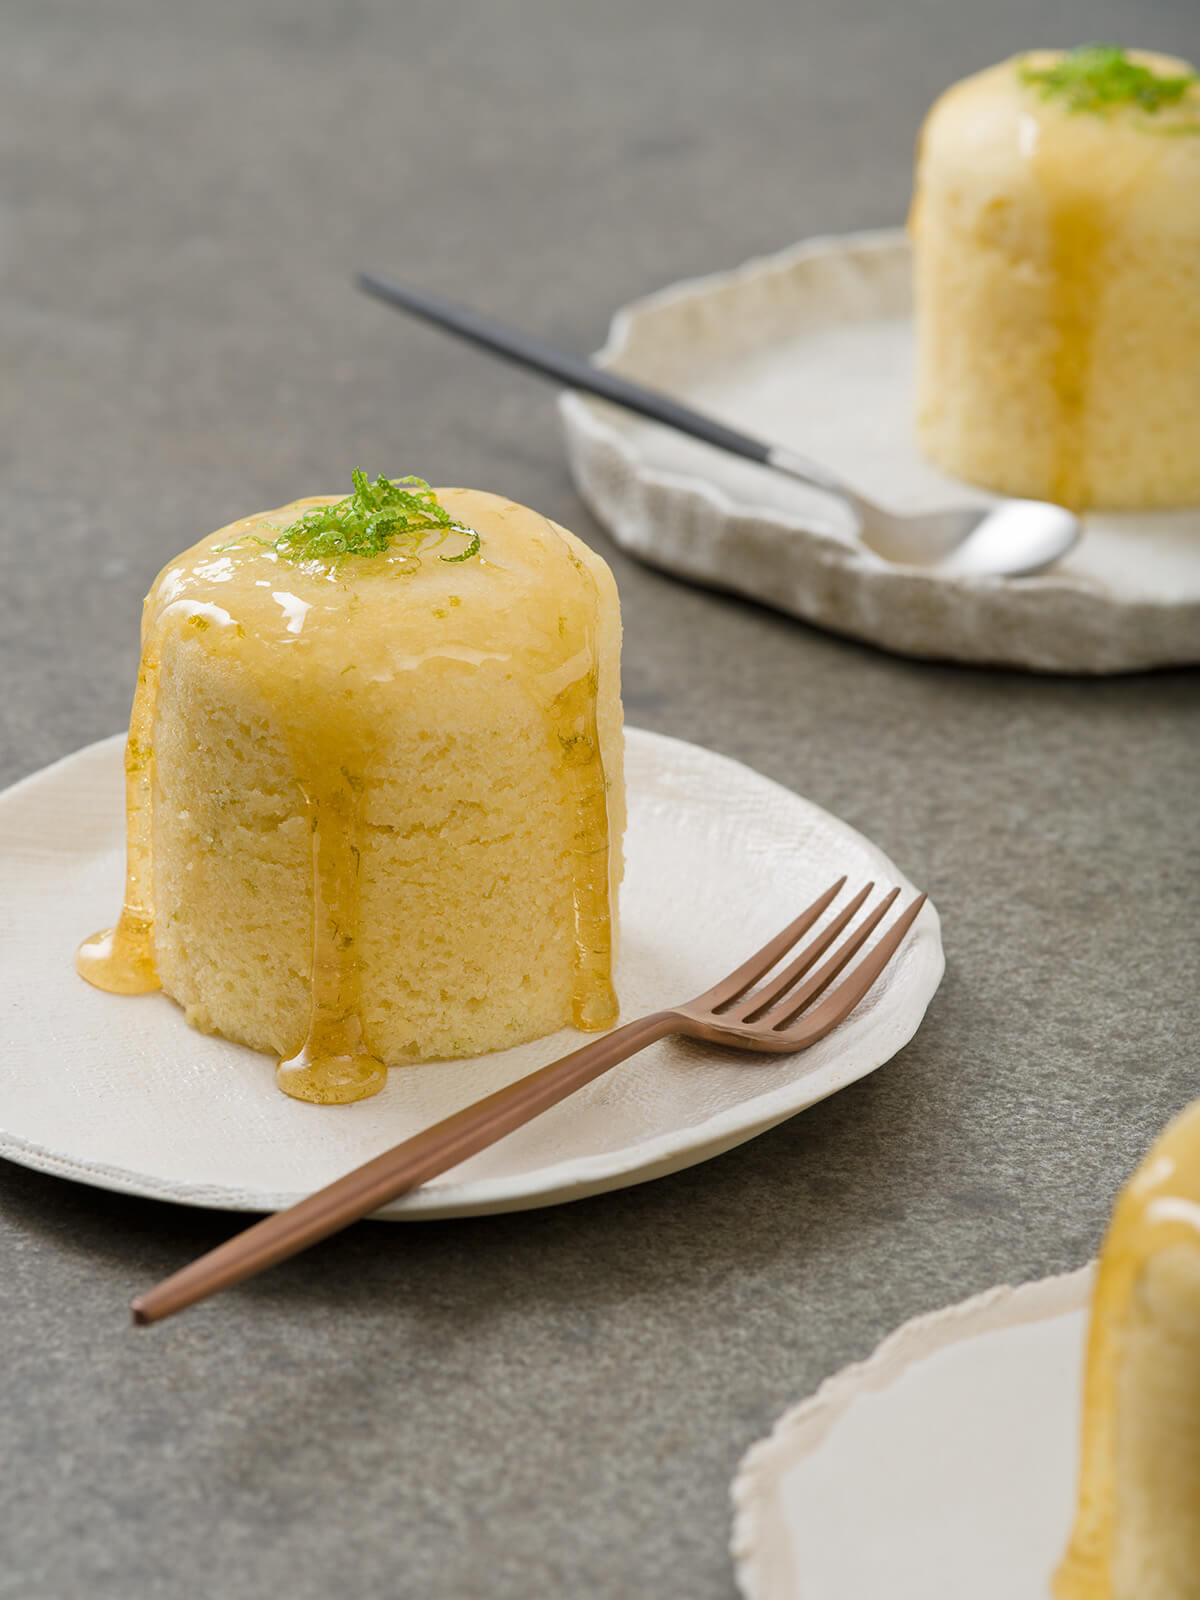 Steamed lime syrup cakes - Miele Experience Centre